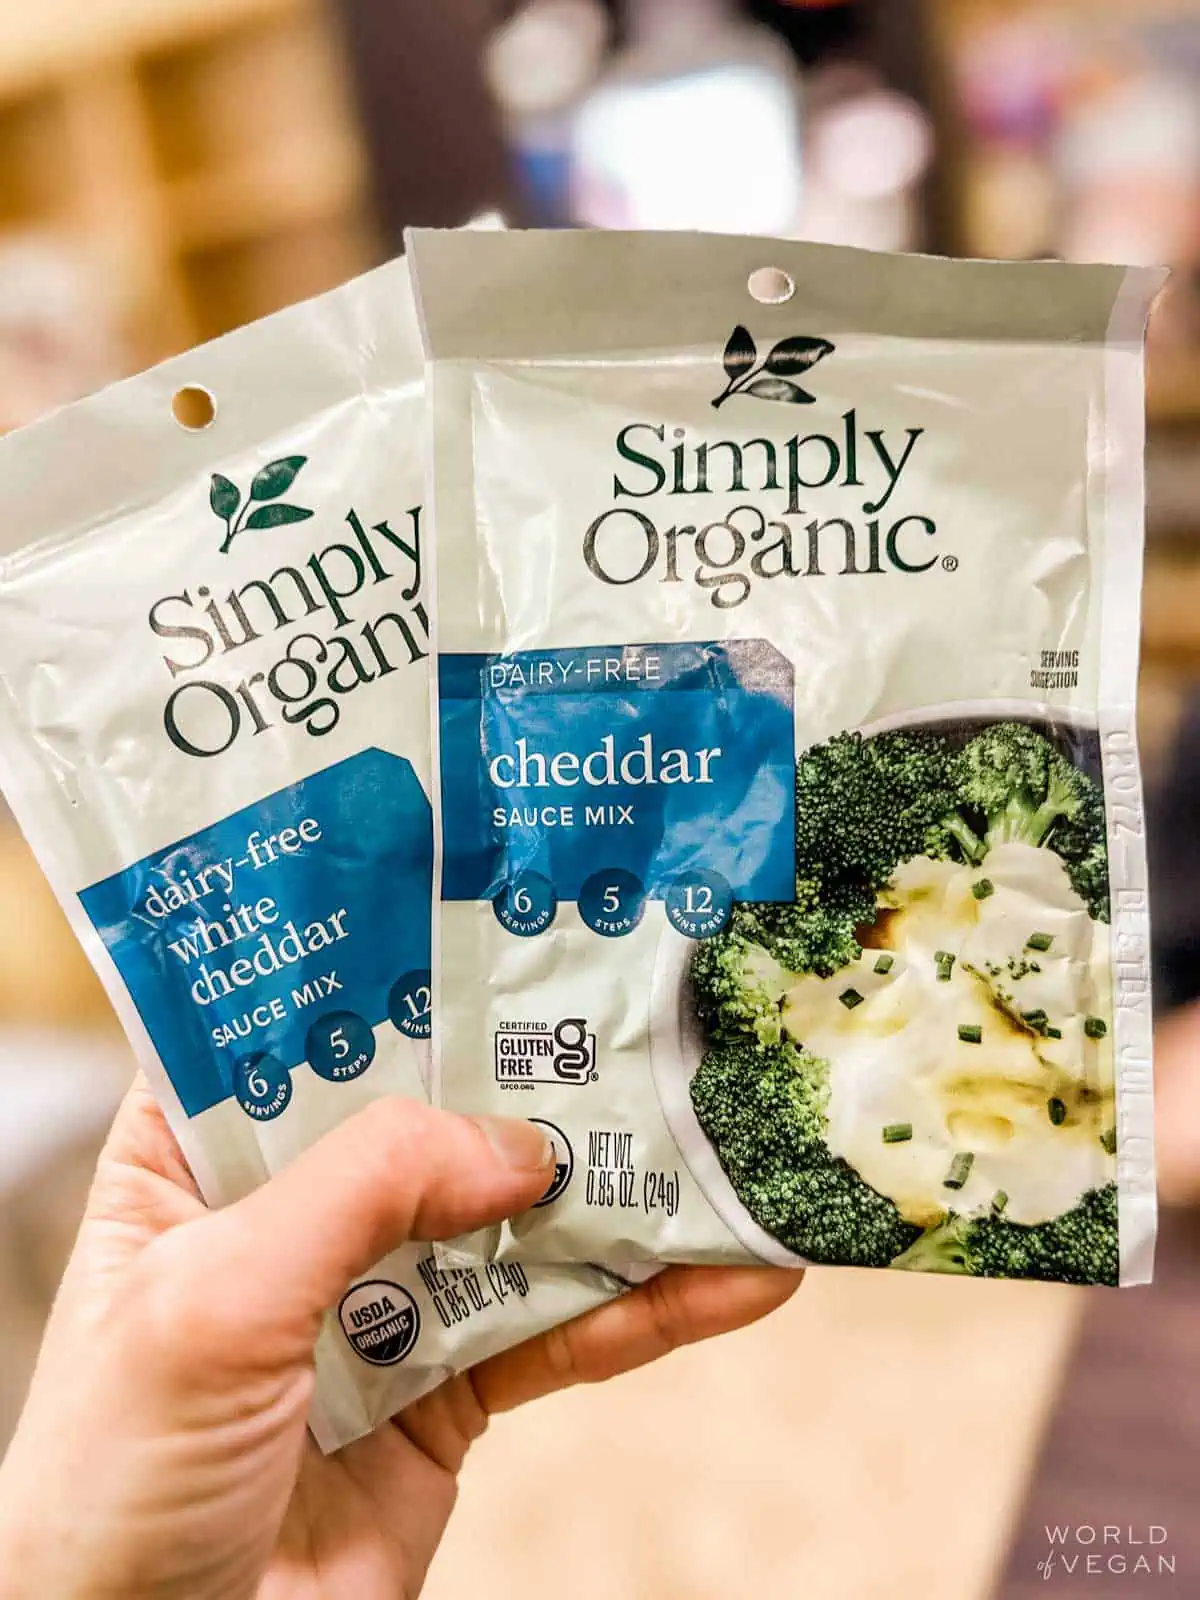 A packet of dairy-free cheddar sauce mix by Simply Organic.